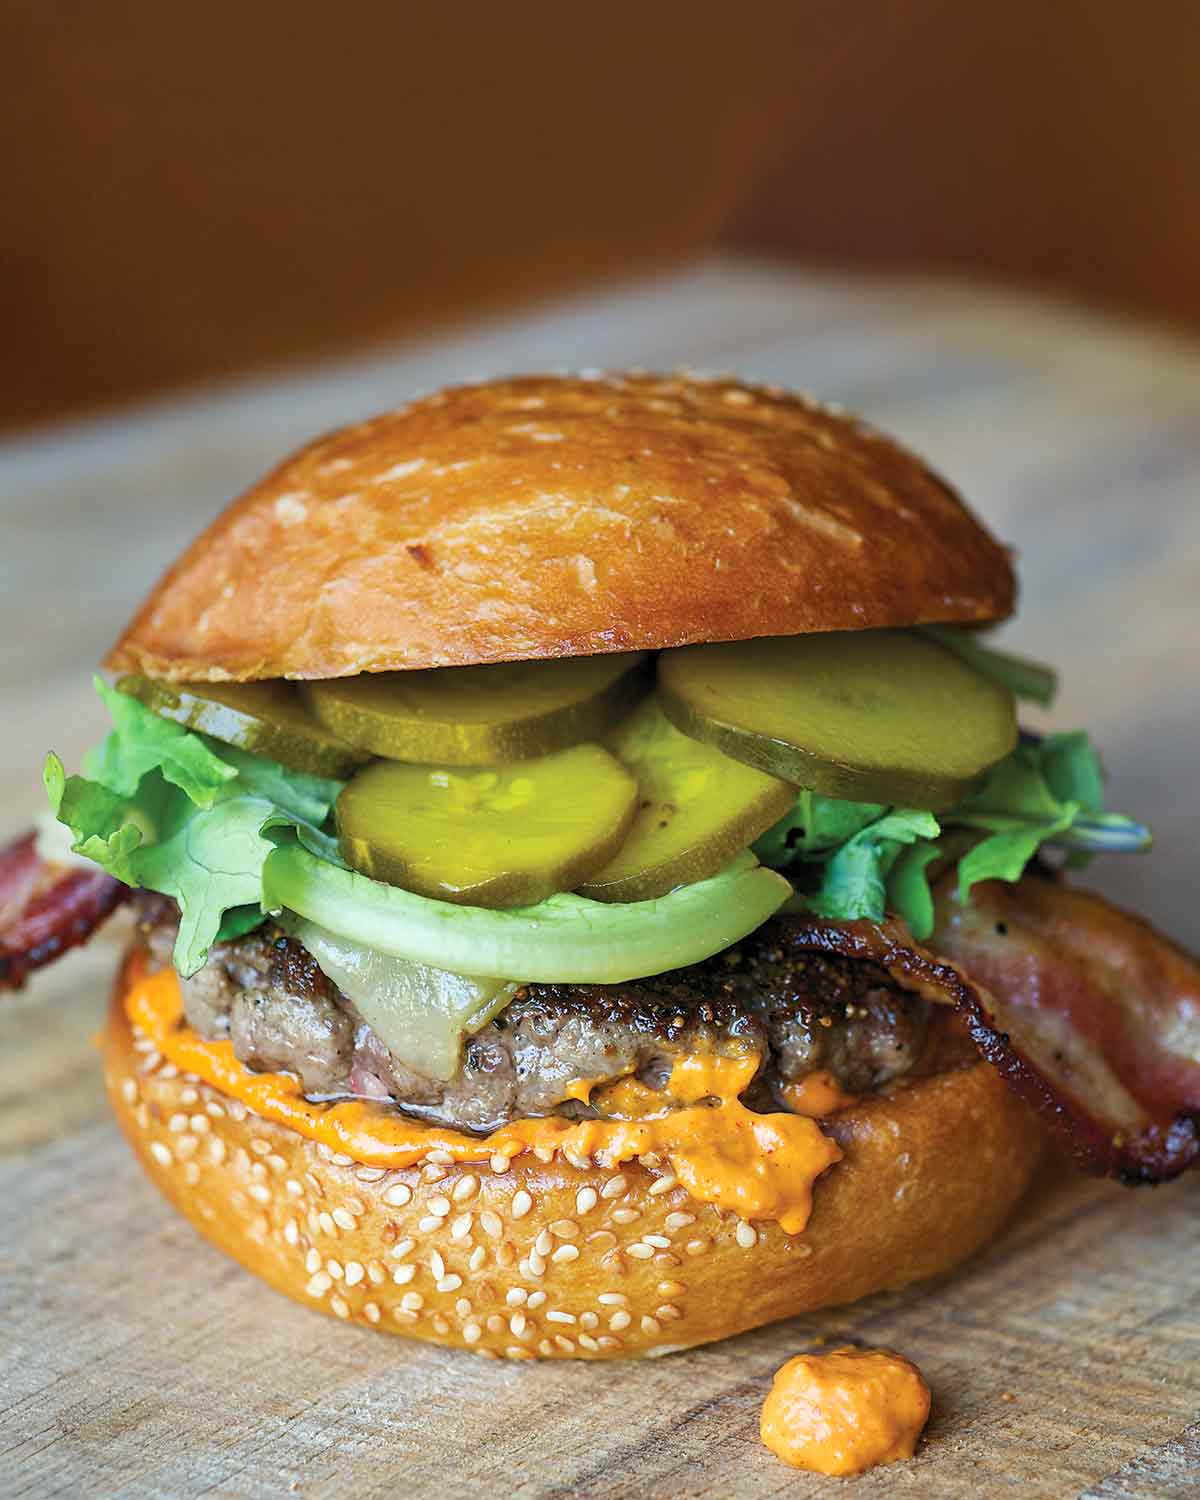 A cheeseburger sitting on a countertop, with a sesame bun, melted cheese, a beef patty, lettuce, bacon, and pickled zucchini.